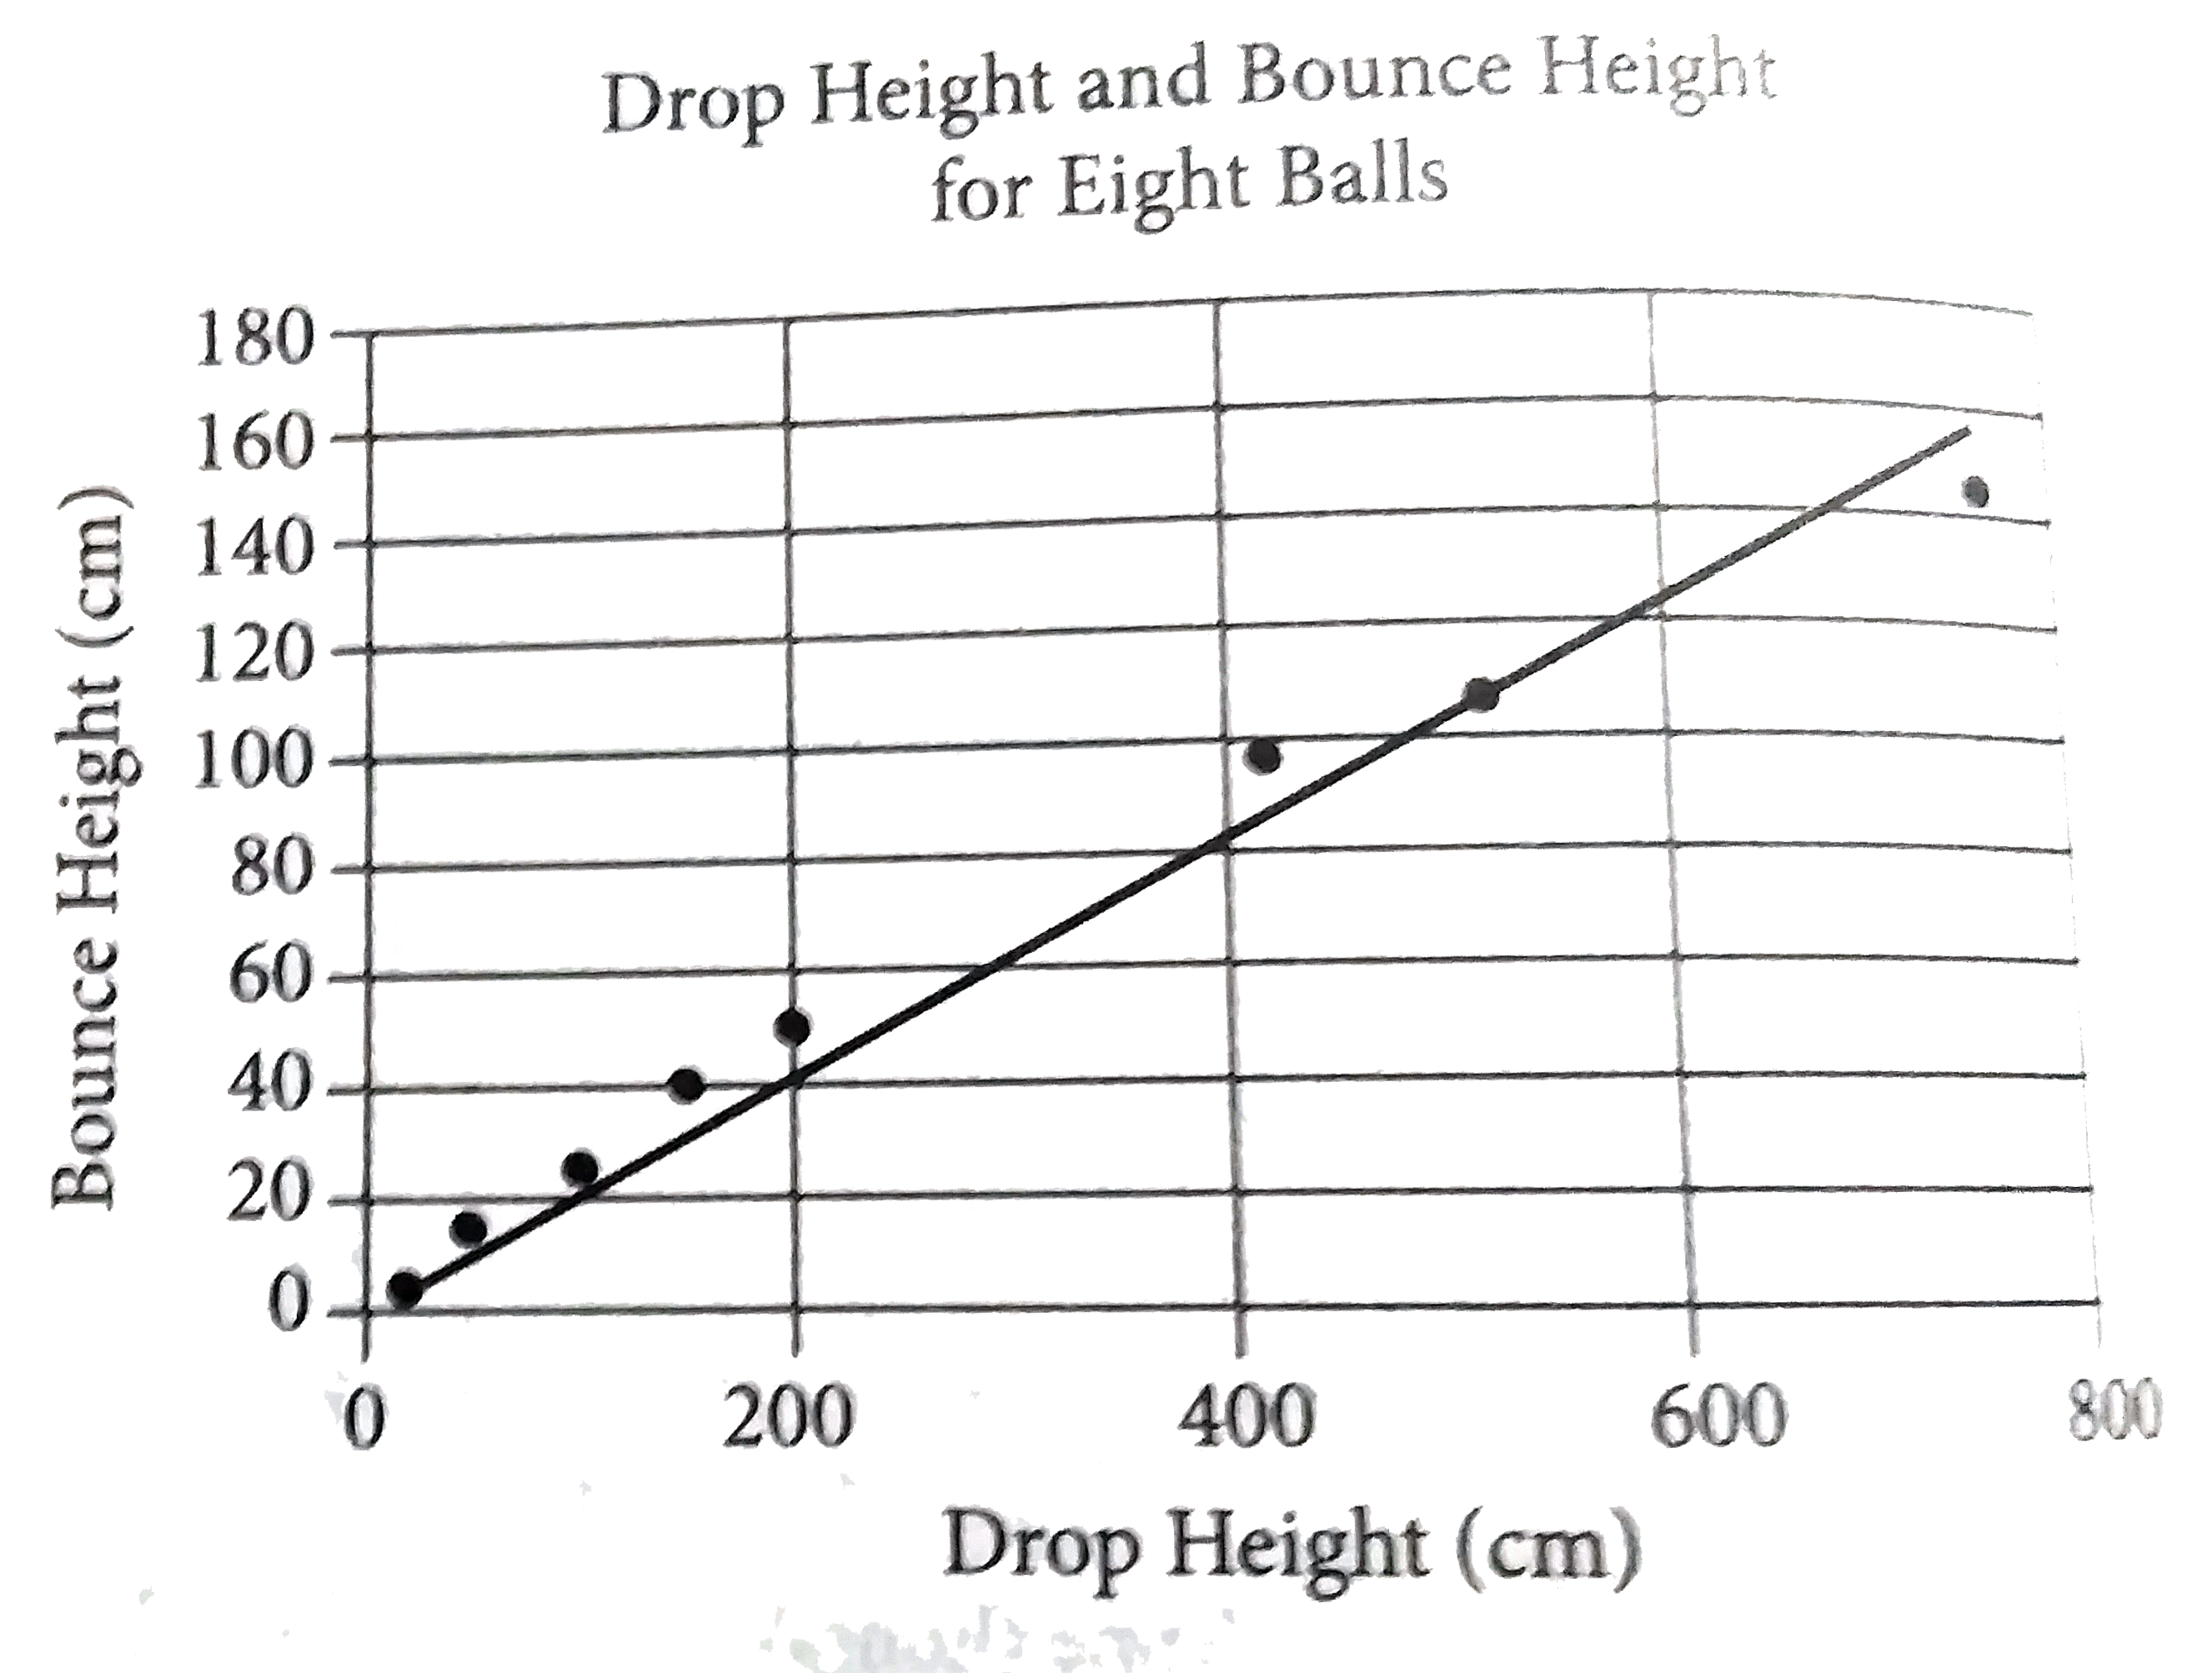 The scatterplot above shows the height in centimeters for both the drop and bounce of eight different balls of the same type. The line of best fit for the data is also shown. According to the lines of best fit, which of the following is closest to the predicted increase in bounce height, in centimeters, for every increase of 100 centimeters in drop height?